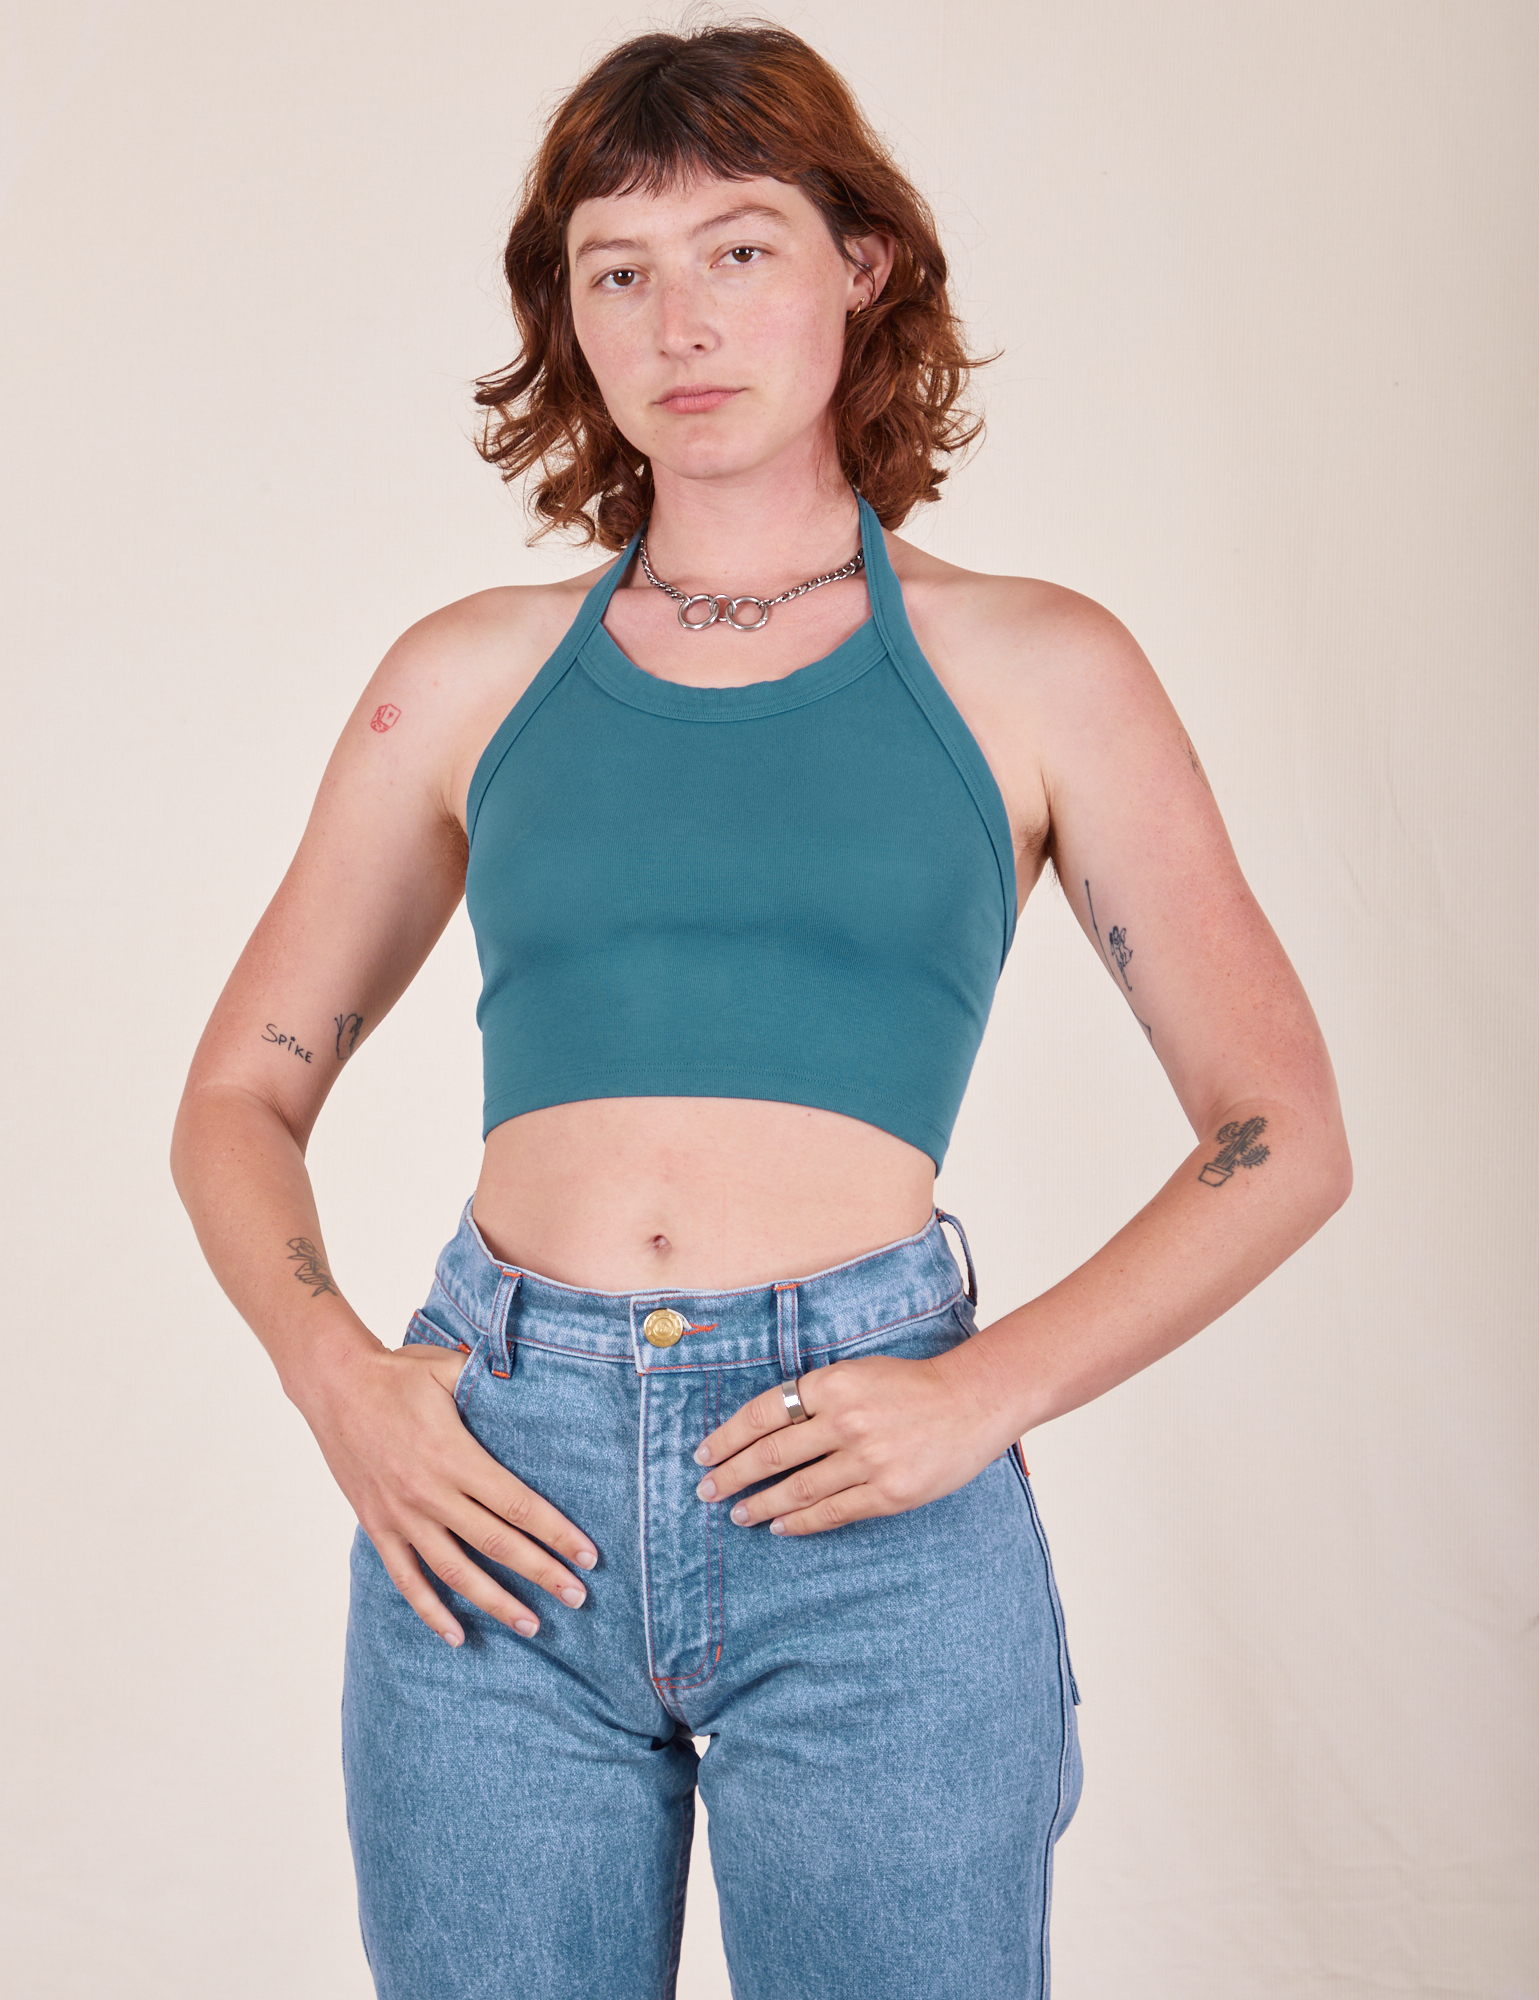 Alex is wearing Halter Top in Marine Blue and light wash Frontier Jeans